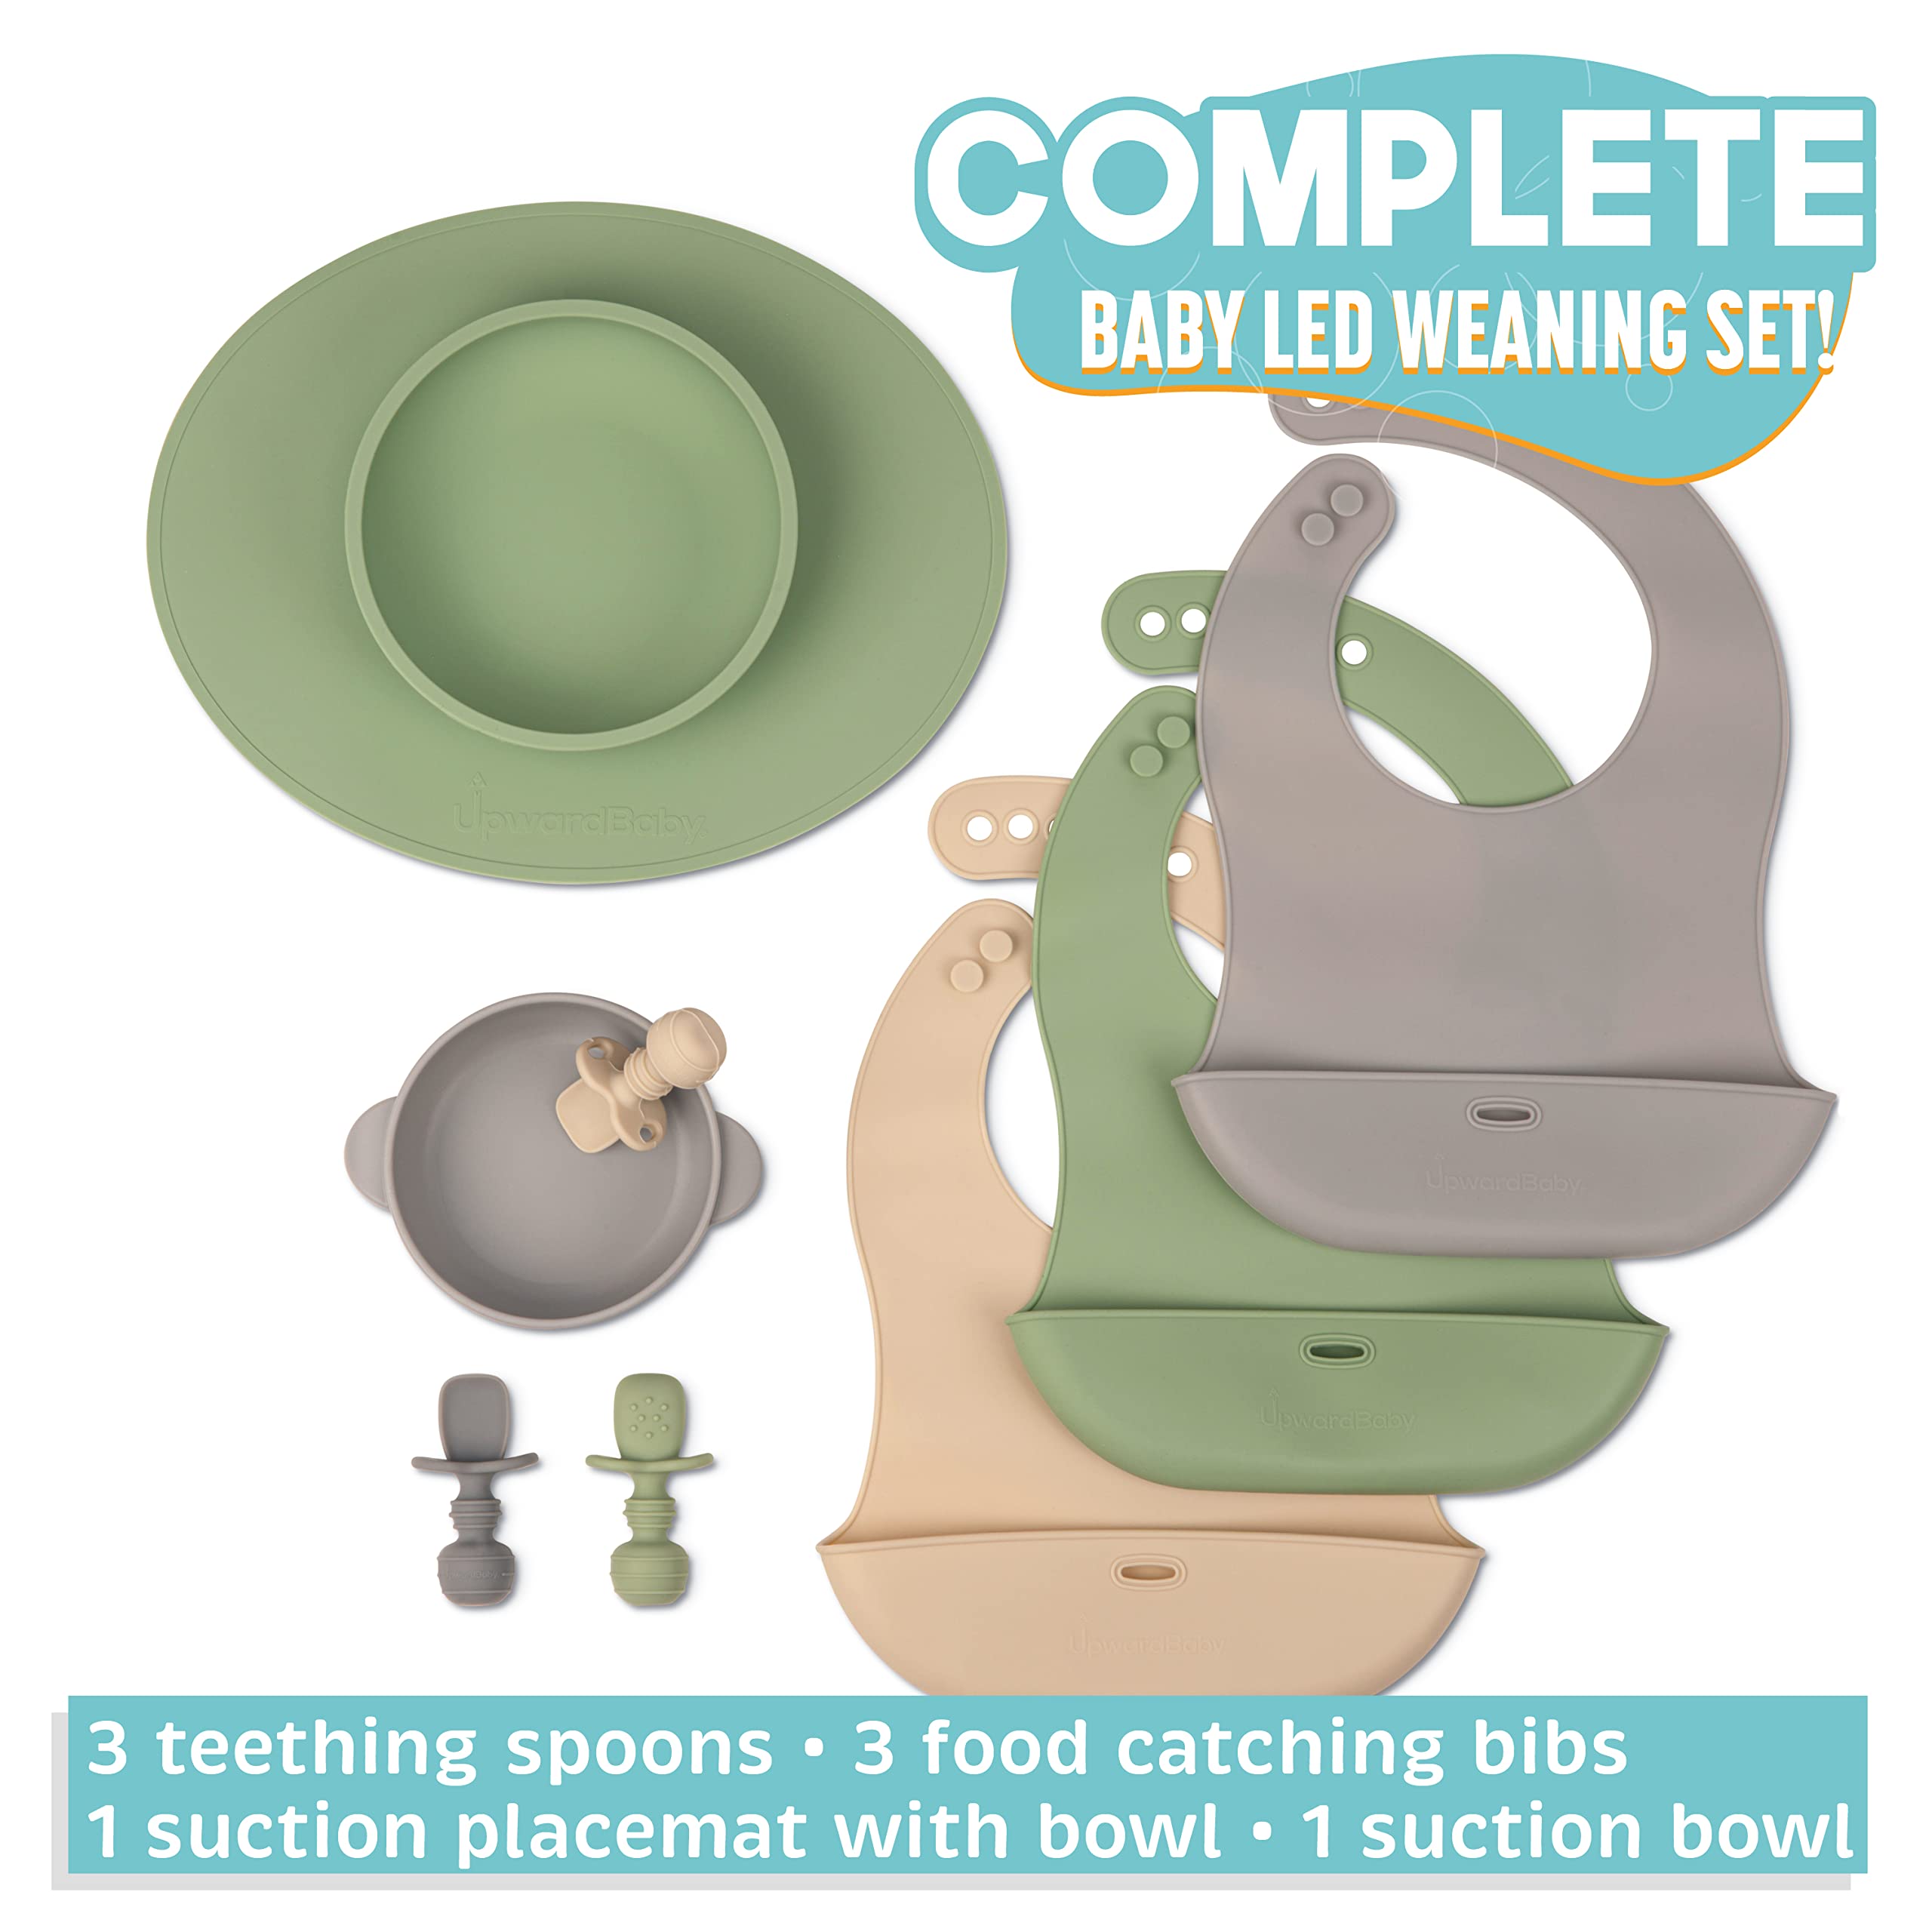 Upward Baby Led Weaning Supplies - Suction Plates for Baby - Spoons Self Feeding 6 months Suction Bowls Silicone Plates - Toddler Plates Bowls Self Eating - Infant First Stage BLW Utensils 6-12 Months